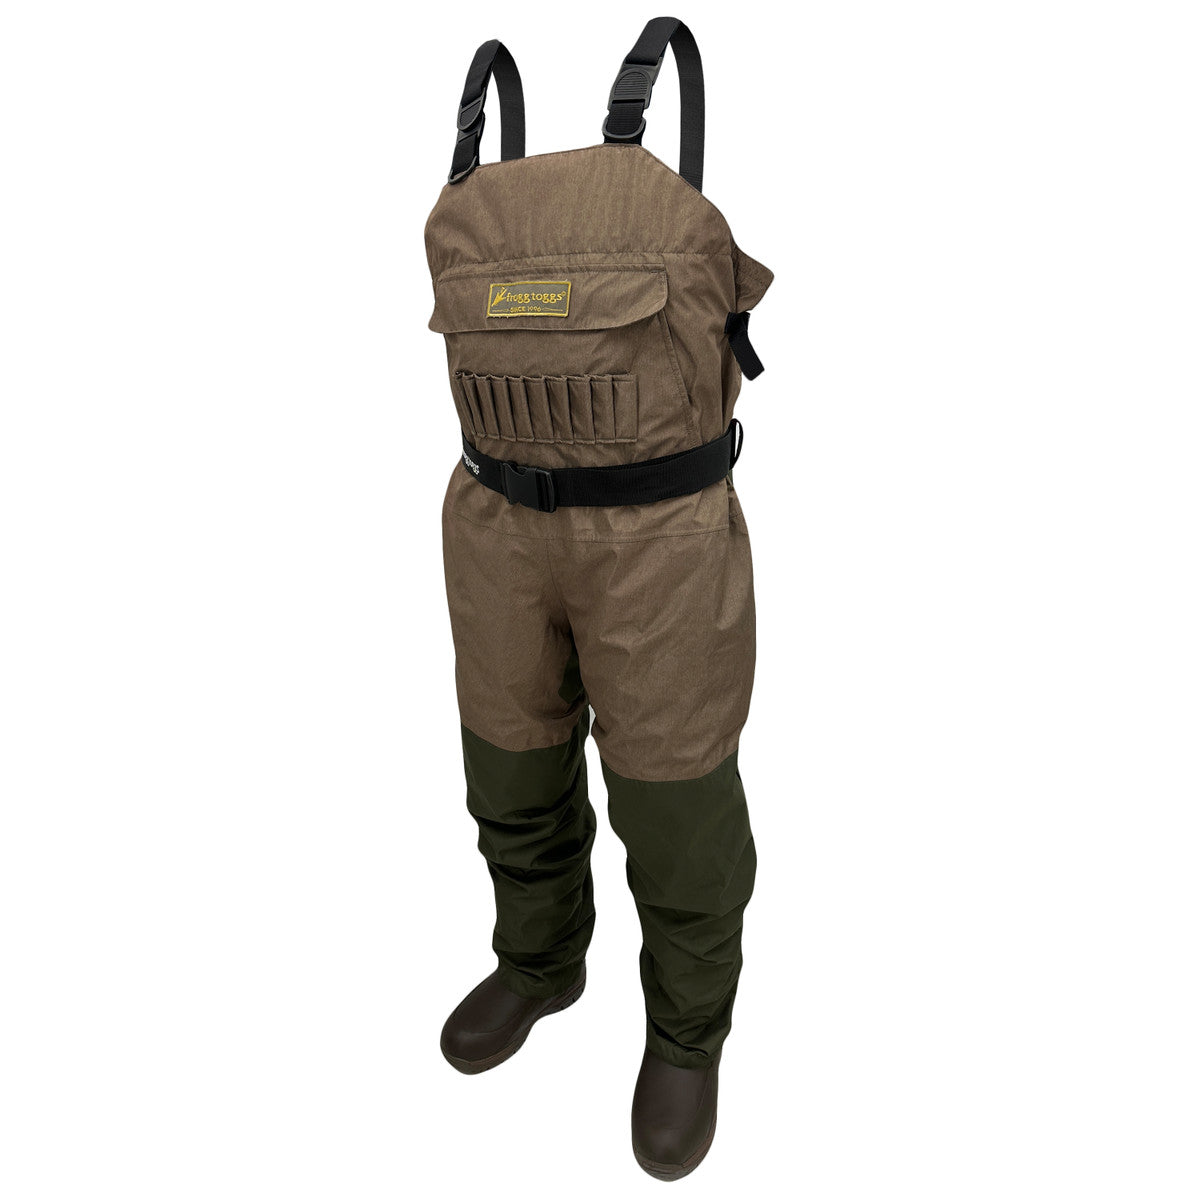 Frogg Togg Men's Tradition Refuge 3.0 Waders - Brown